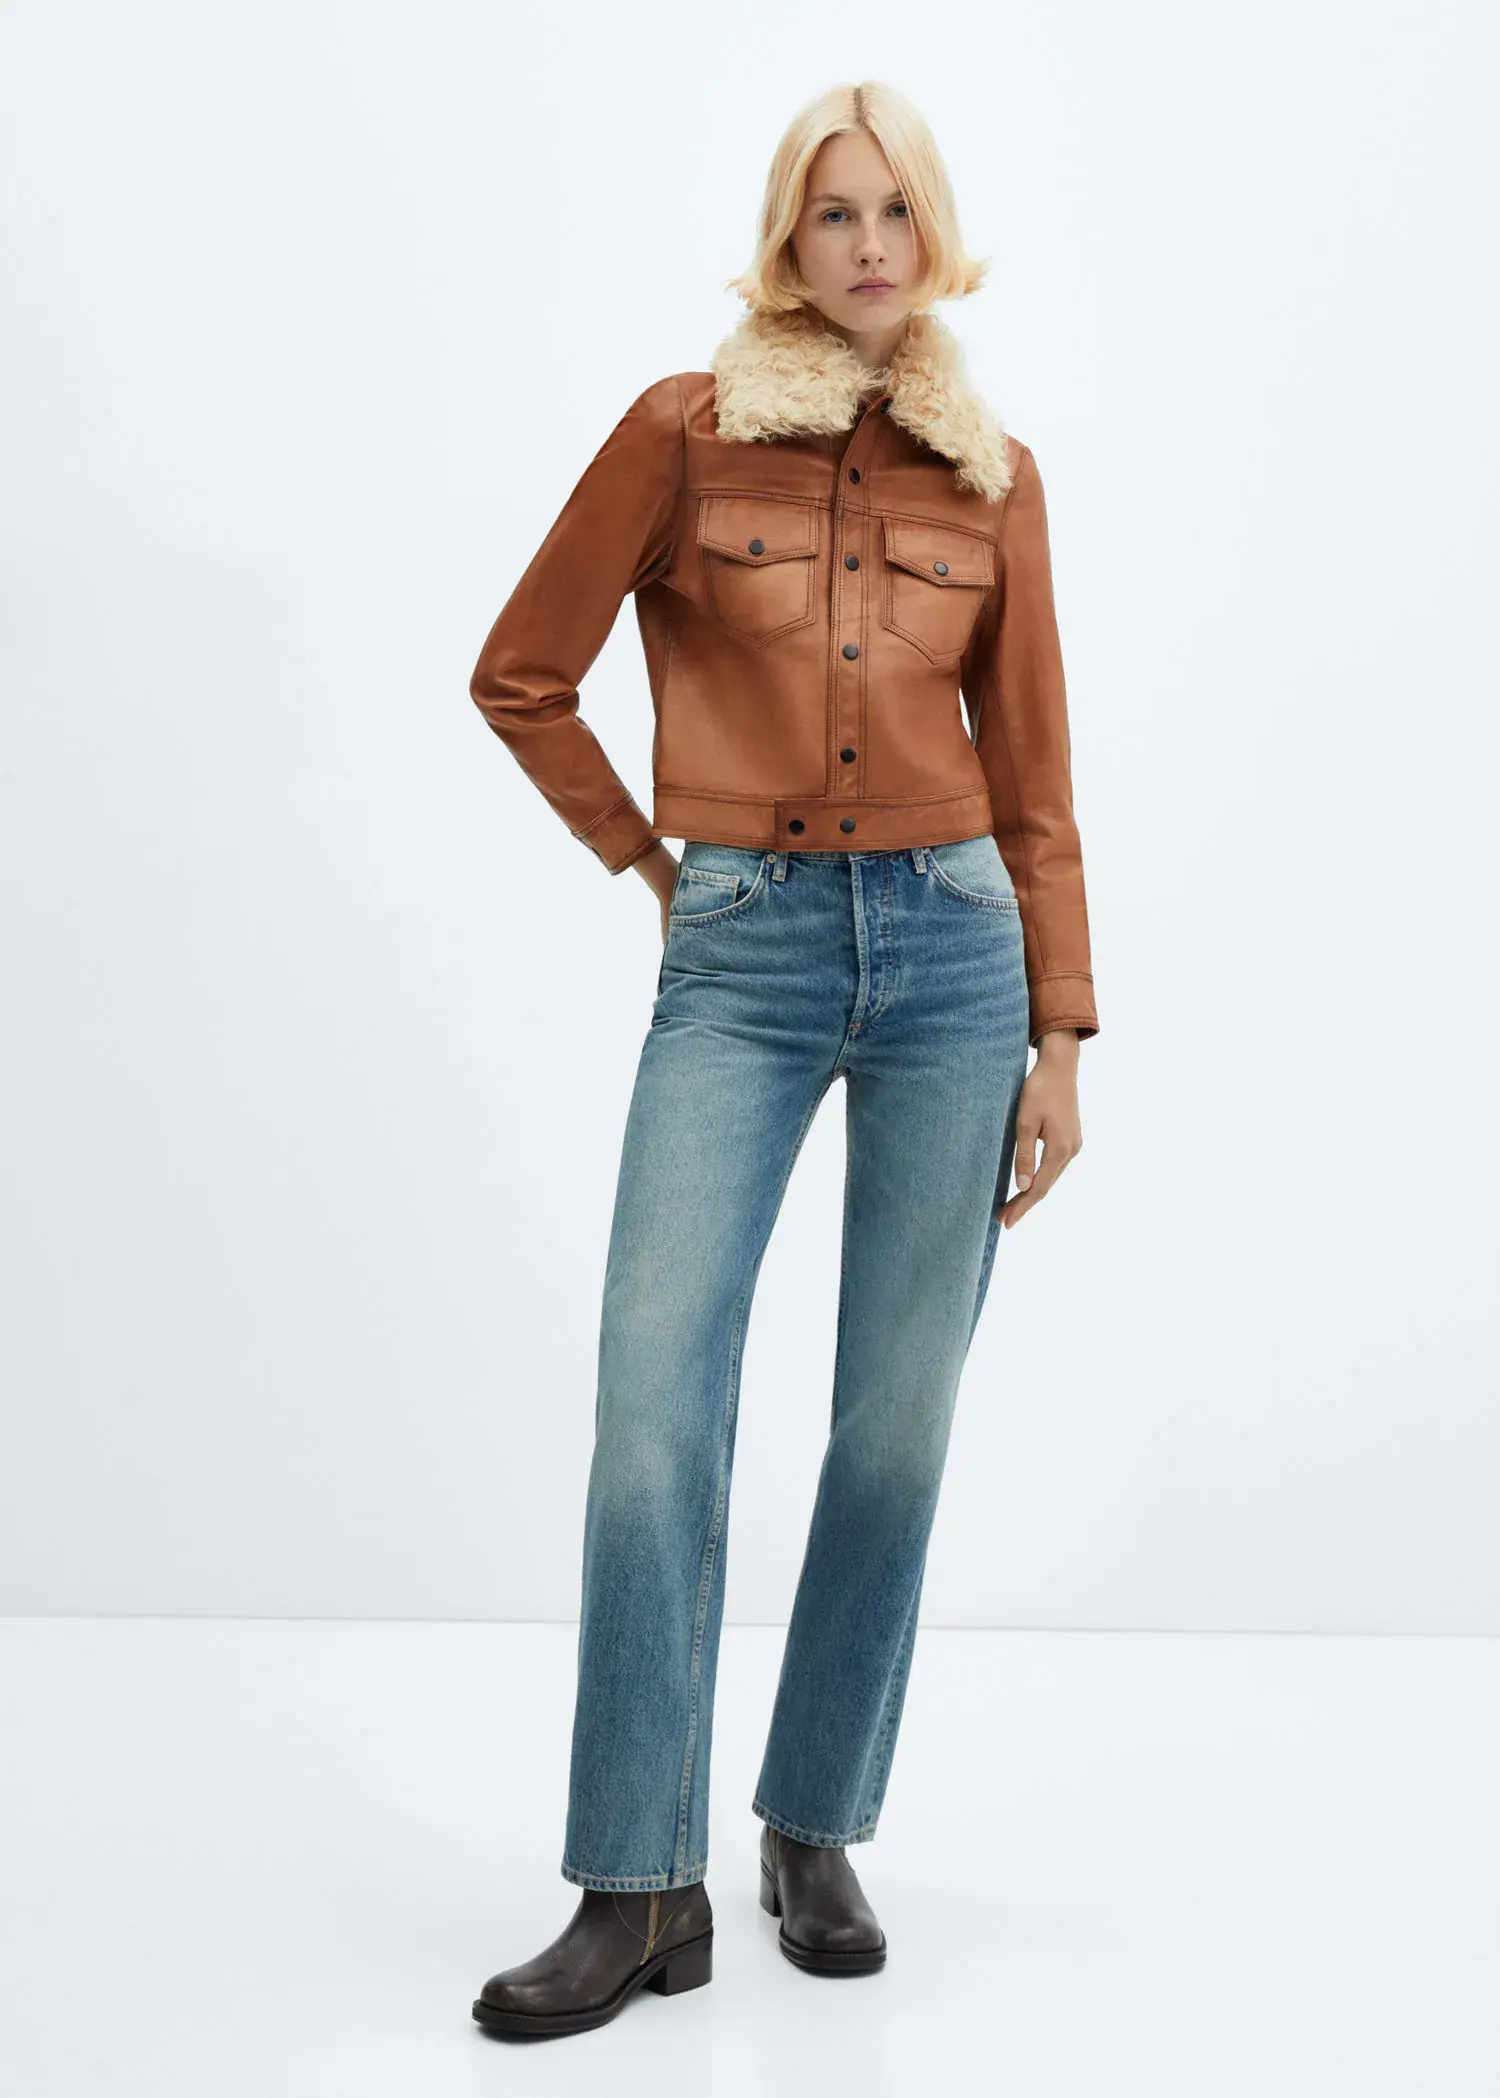 Mango Suede jacket with fur-effect collar. 3